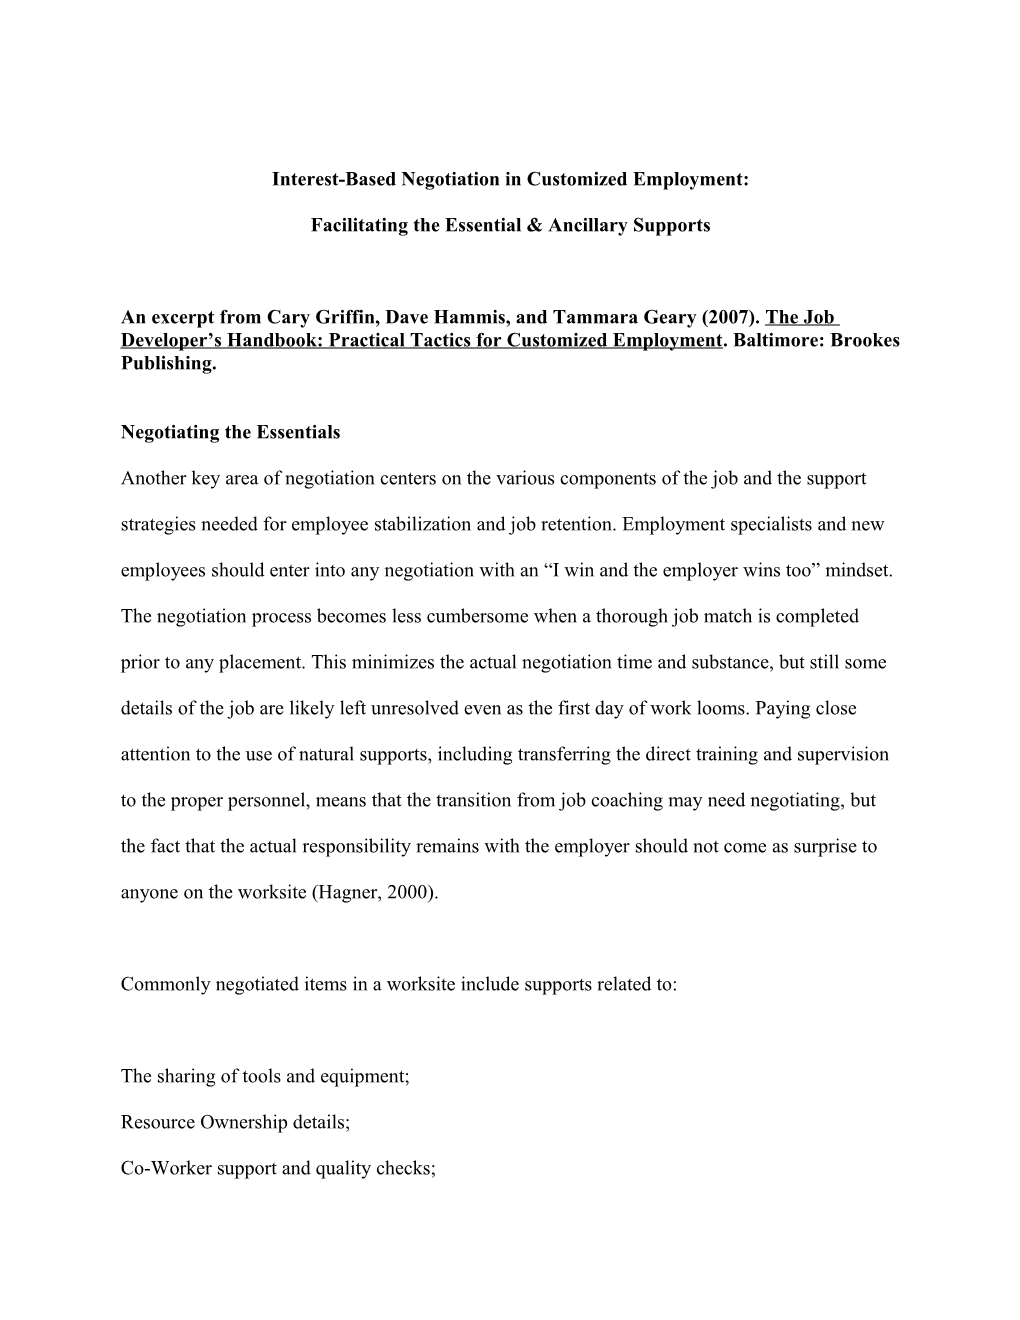 Interest-Based Negotiation in Customized Employment